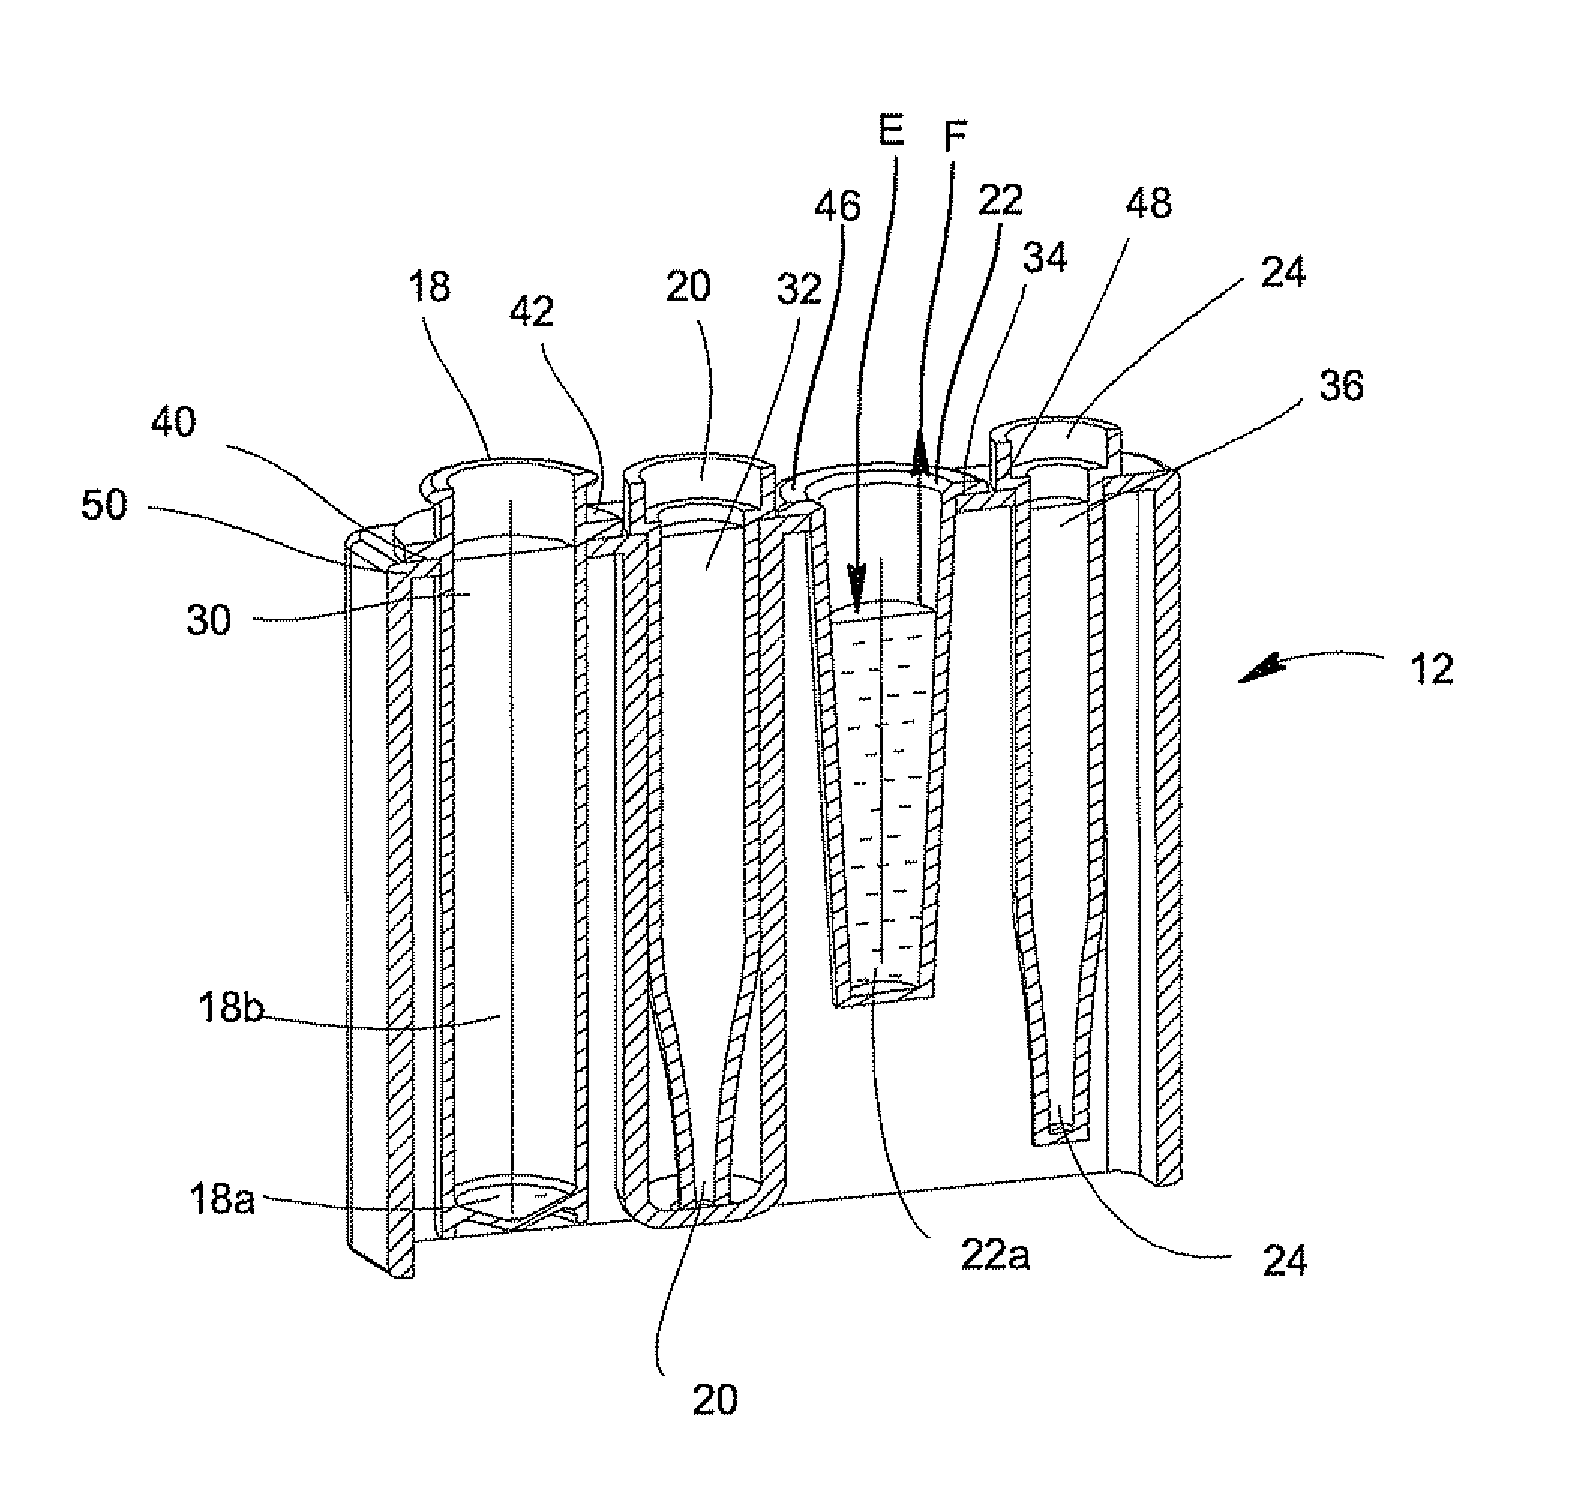 System for Conducting the Identification of Bacteria in Biological Samples